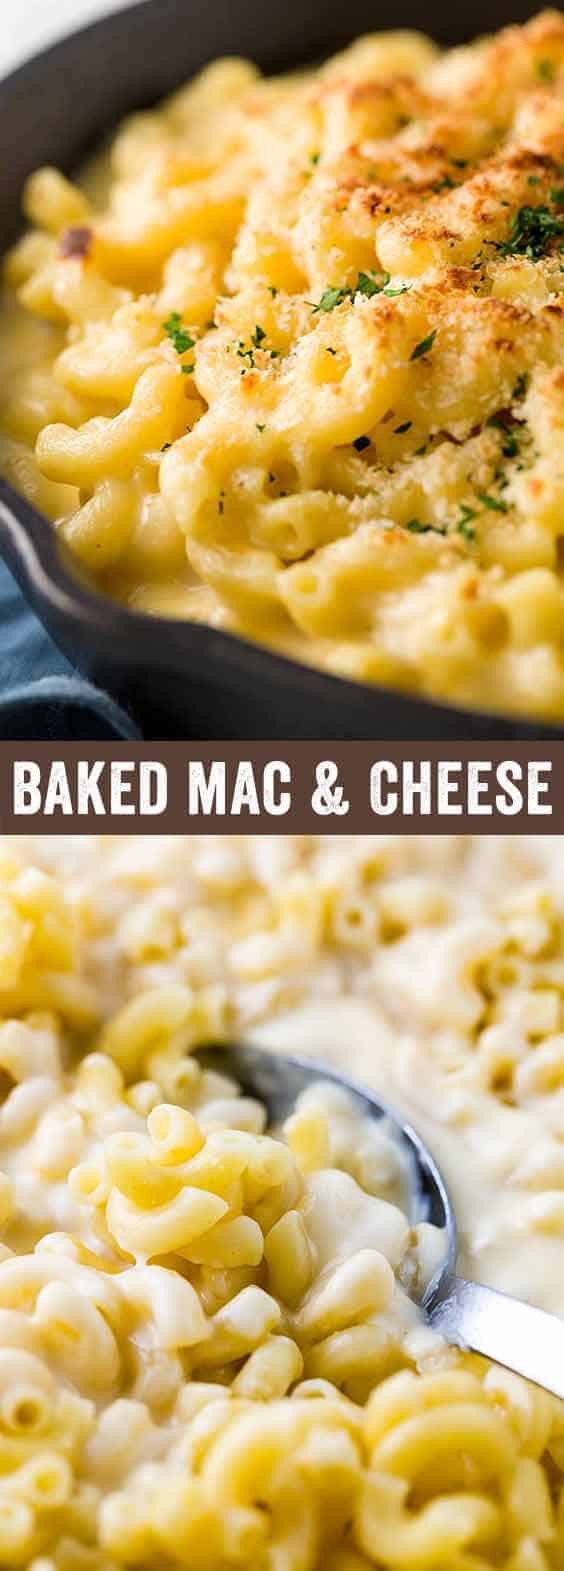 Baked Macaroni And Cheese With Ham And Bread Crumbs
 Baked Macaroni and Cheese with Bread Crumb Topping